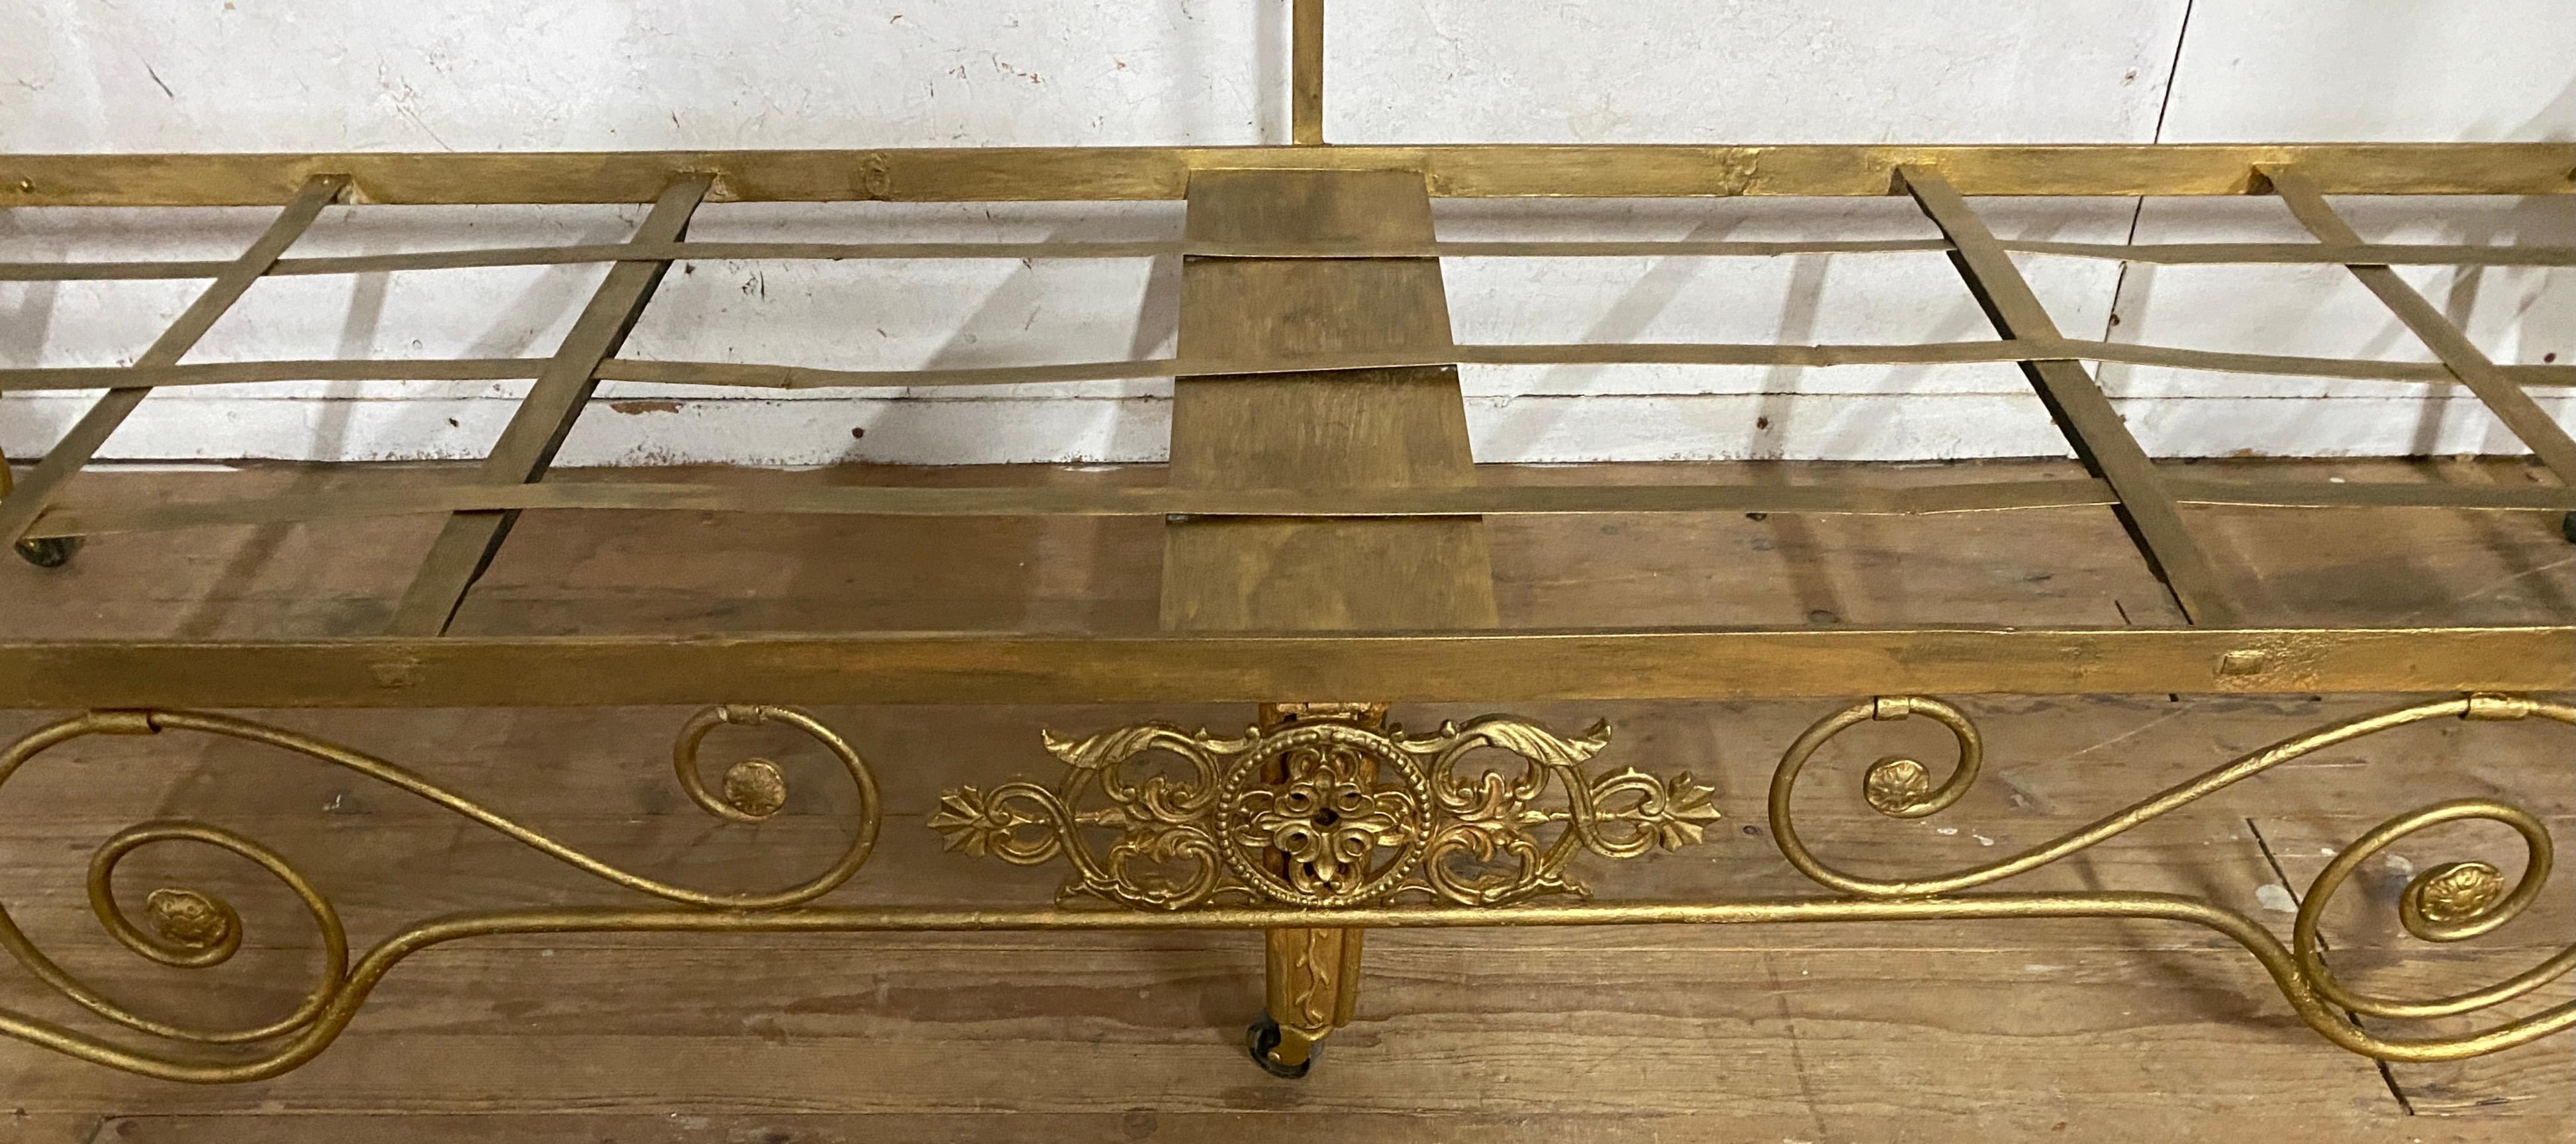 Add glamour and style with this Napoleon III cast iron lounging day bed to any room. Create your own 24